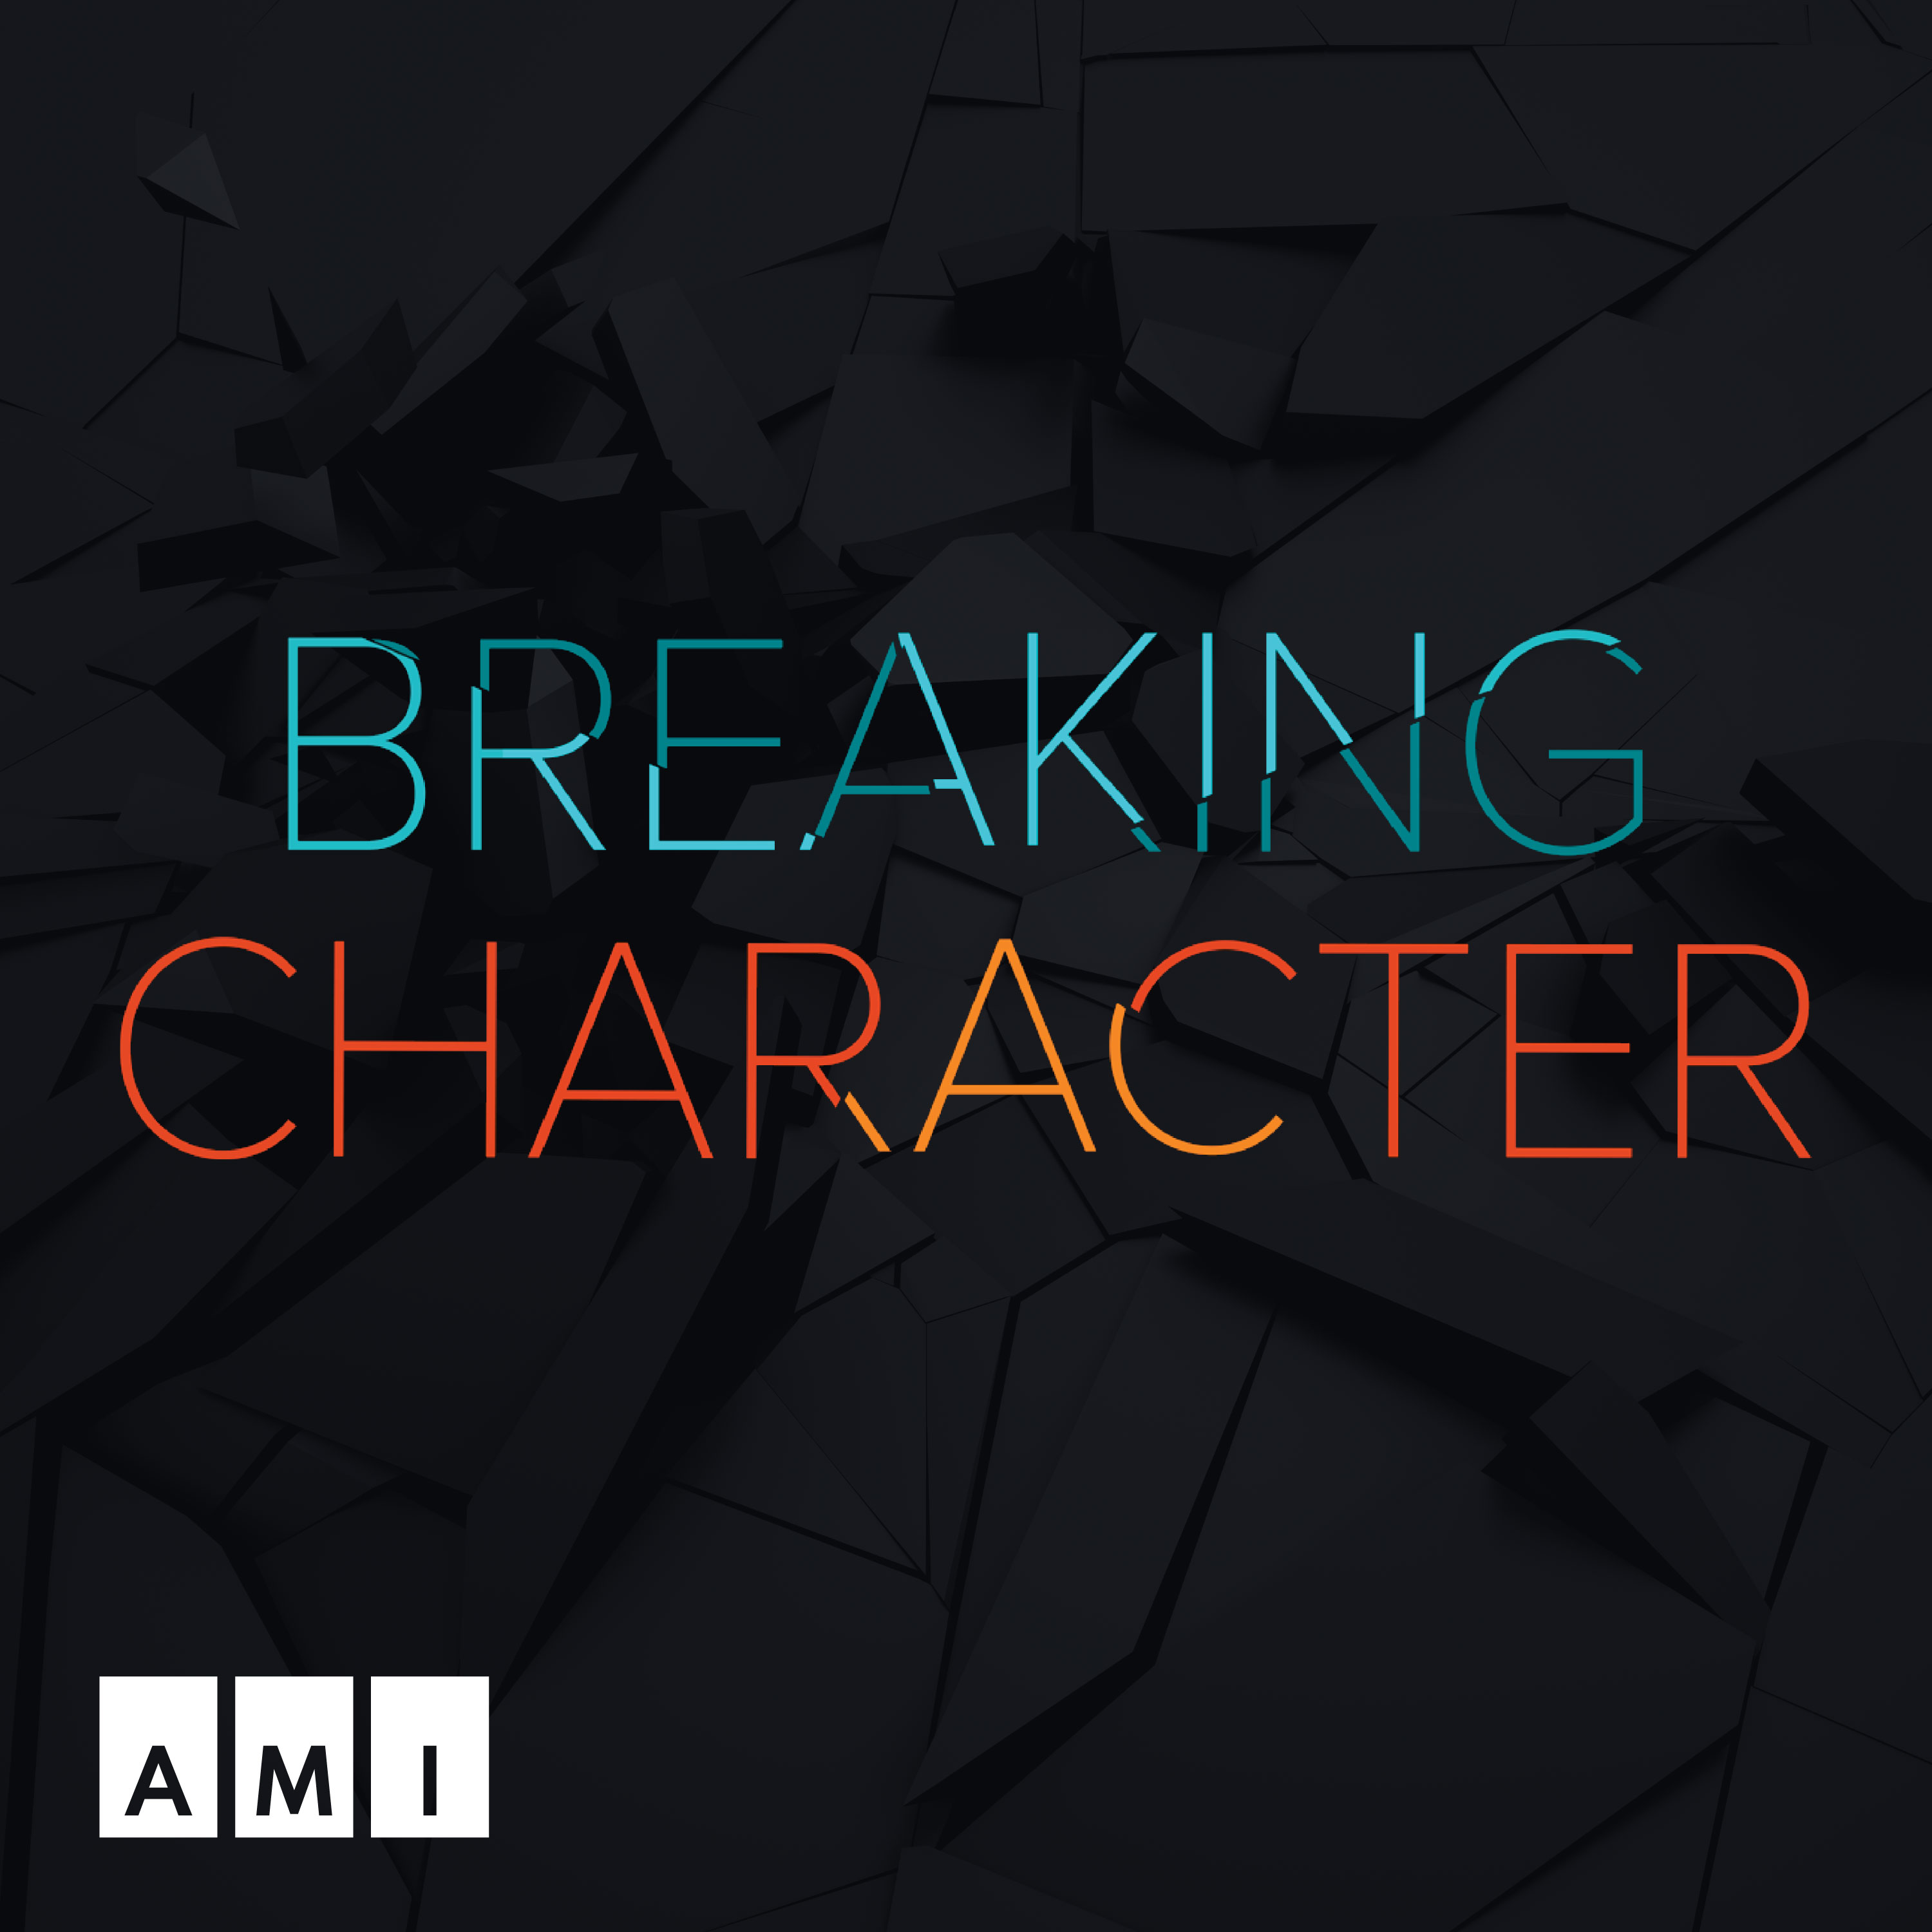 The Breaking Character logo.